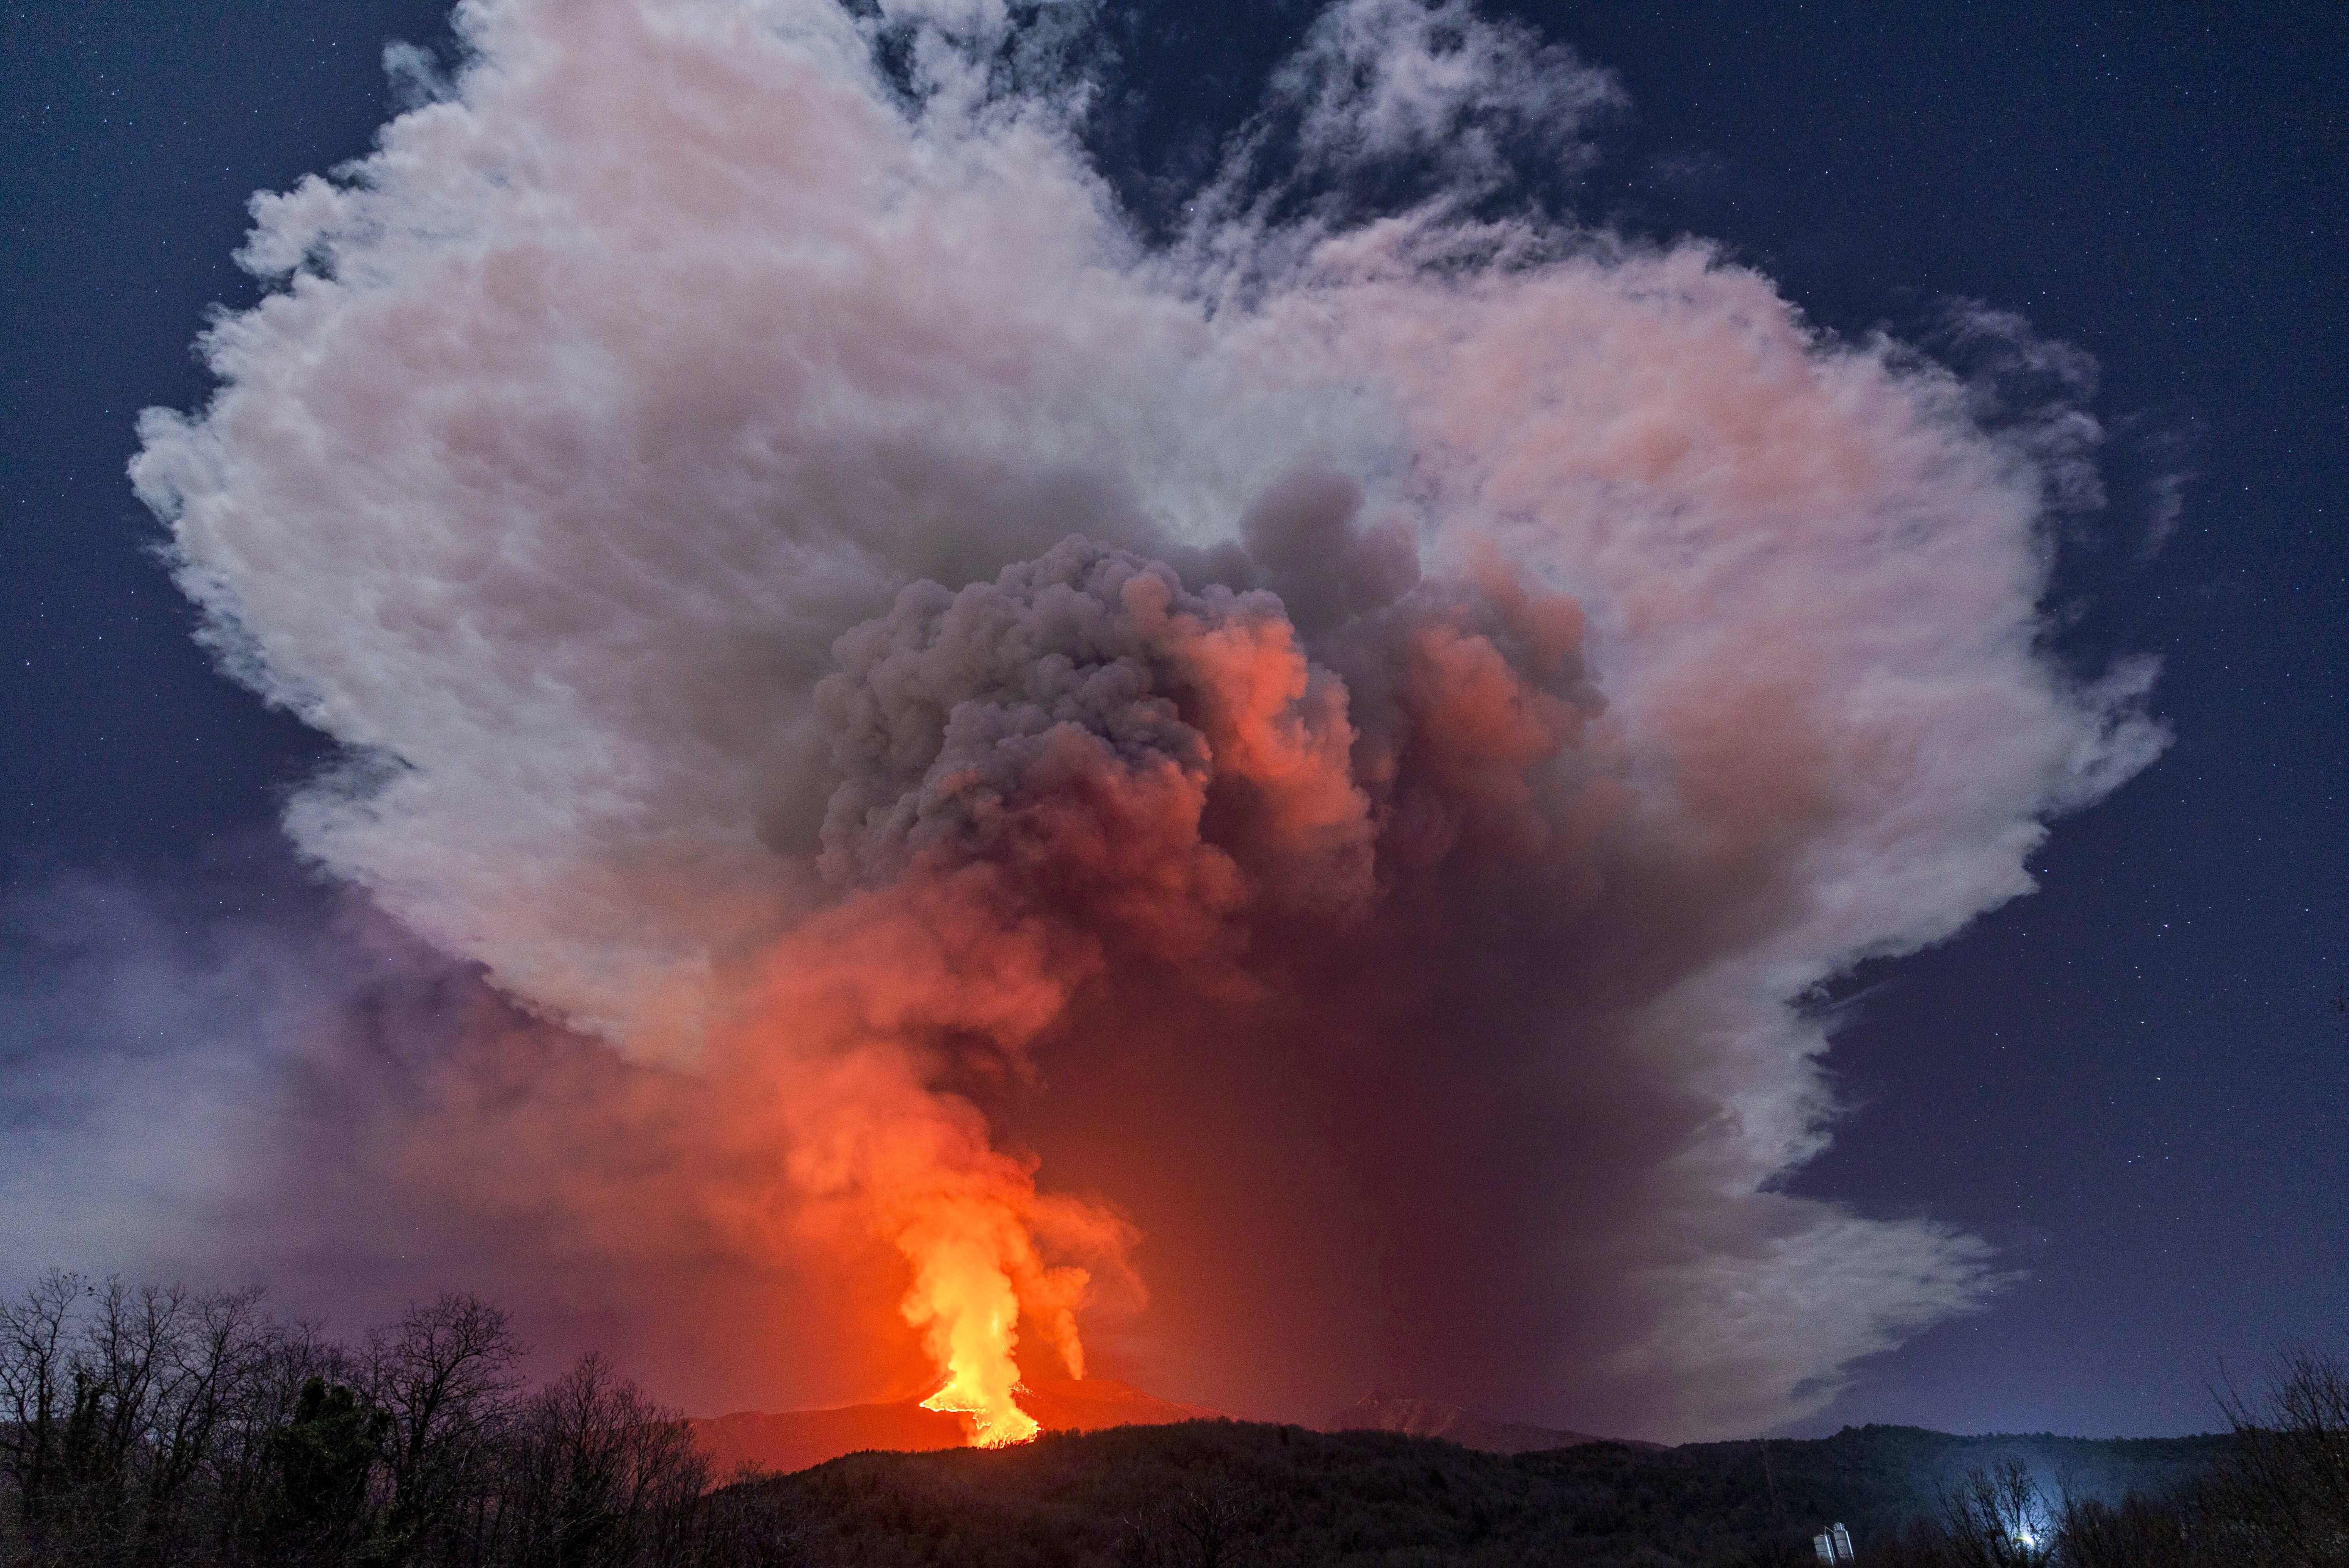 A fiery river of glowing lava flows on the north-east side of the Mount Etna volcano engulfed with ashes and smoke near Milo, Sicily. Photo: AP